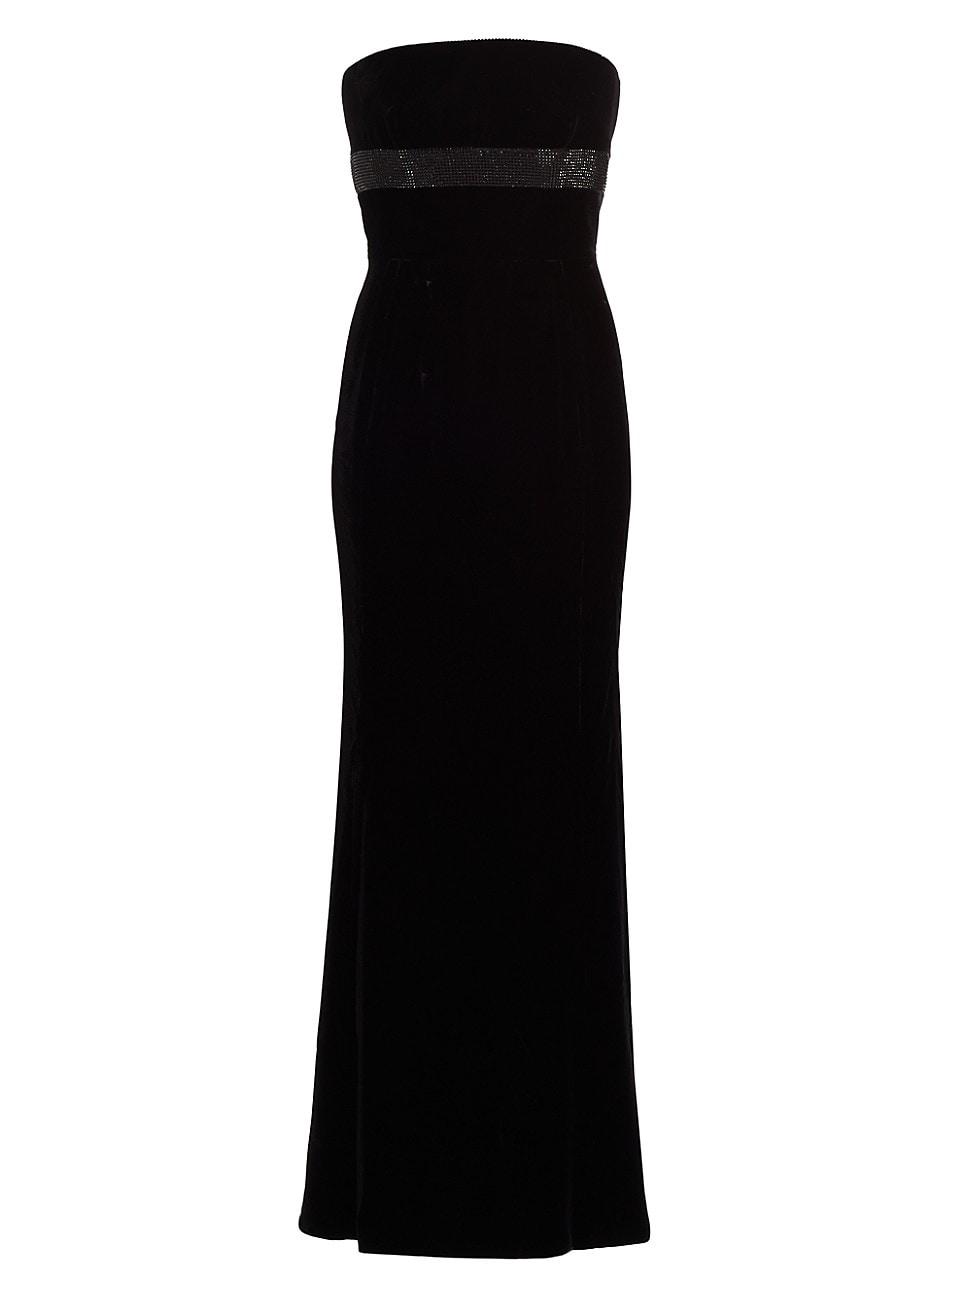 Giorgio Armani Crystal-embellished Velvet Strapless Gown in Black | Lyst